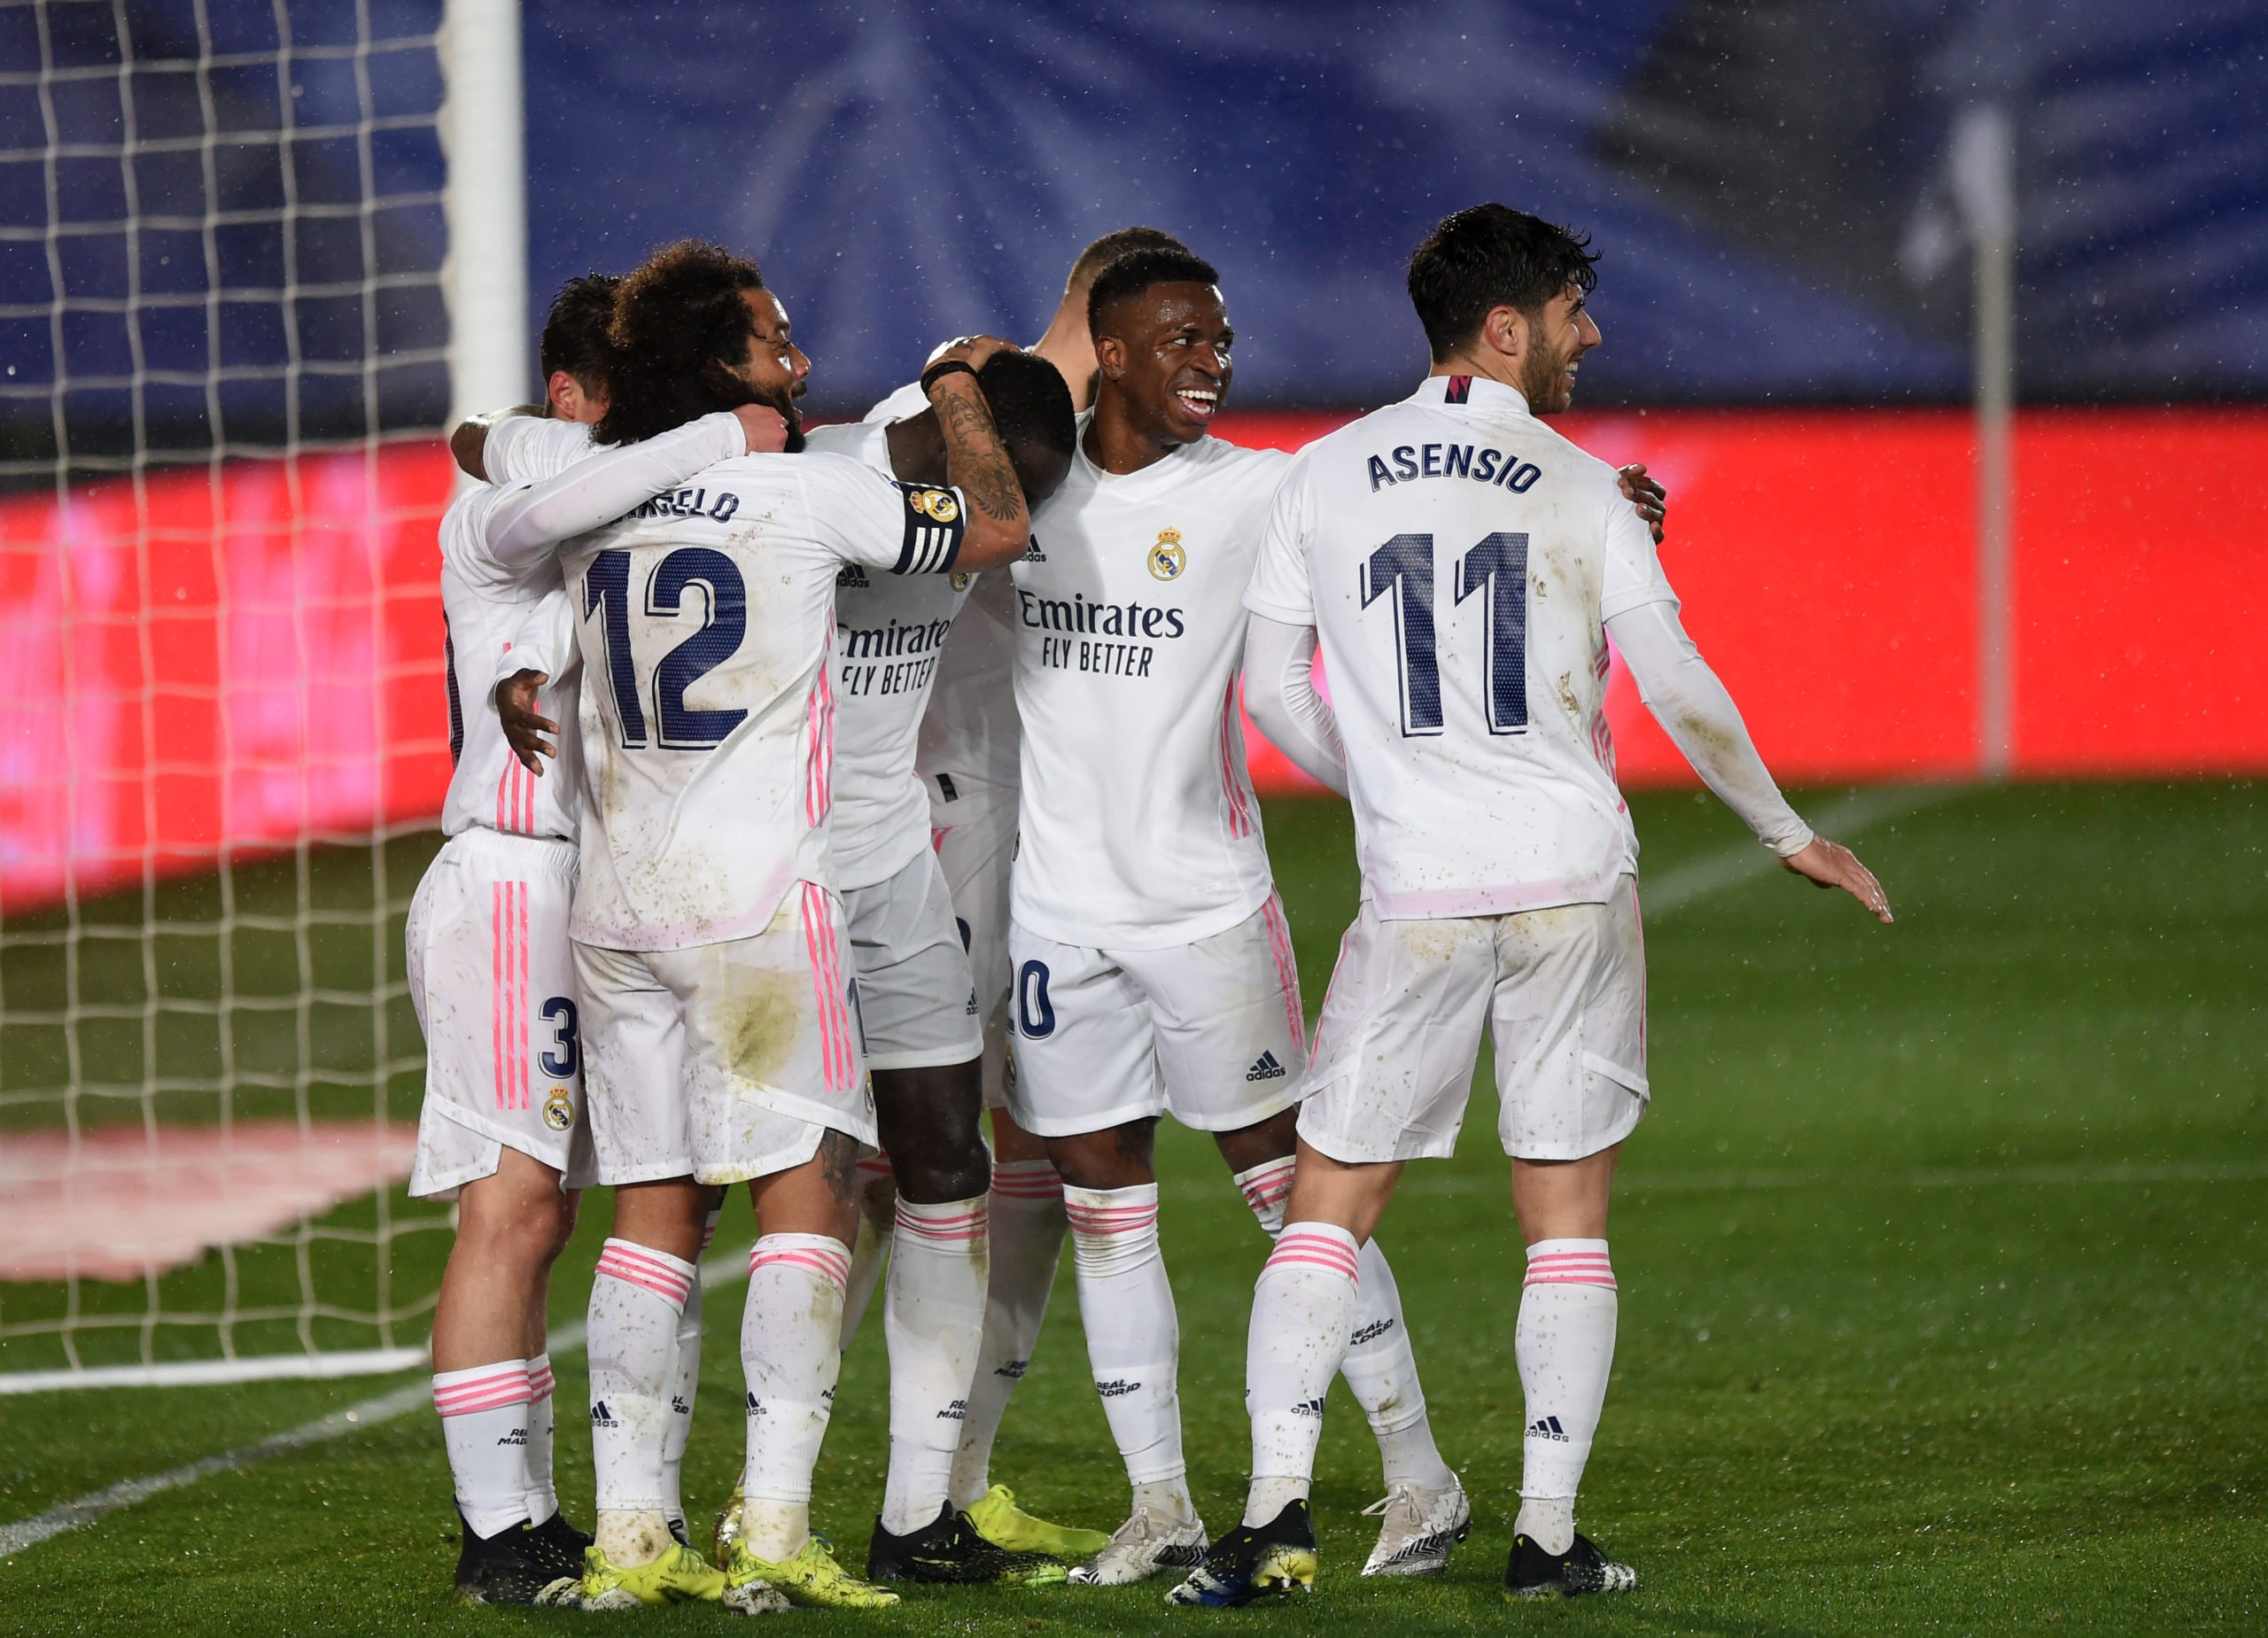 MADRID, SPAIN - FEBRUARY 09: Ferland Mendy of Real Madrid celebrates with teammates after scoring their team's second goal during the La Liga Santander match between Real Madrid and Getafe CF at Estadio Alfredo Di Stefano on February 09, 2021 in Madrid, Spain. Sporting stadiums around Spain remain under strict restrictions due to the Coronavirus Pandemic as Government social distancing laws prohibit fans inside venues resulting in games being played behind closed doors. (Photo by Denis Doyle/Getty Images)